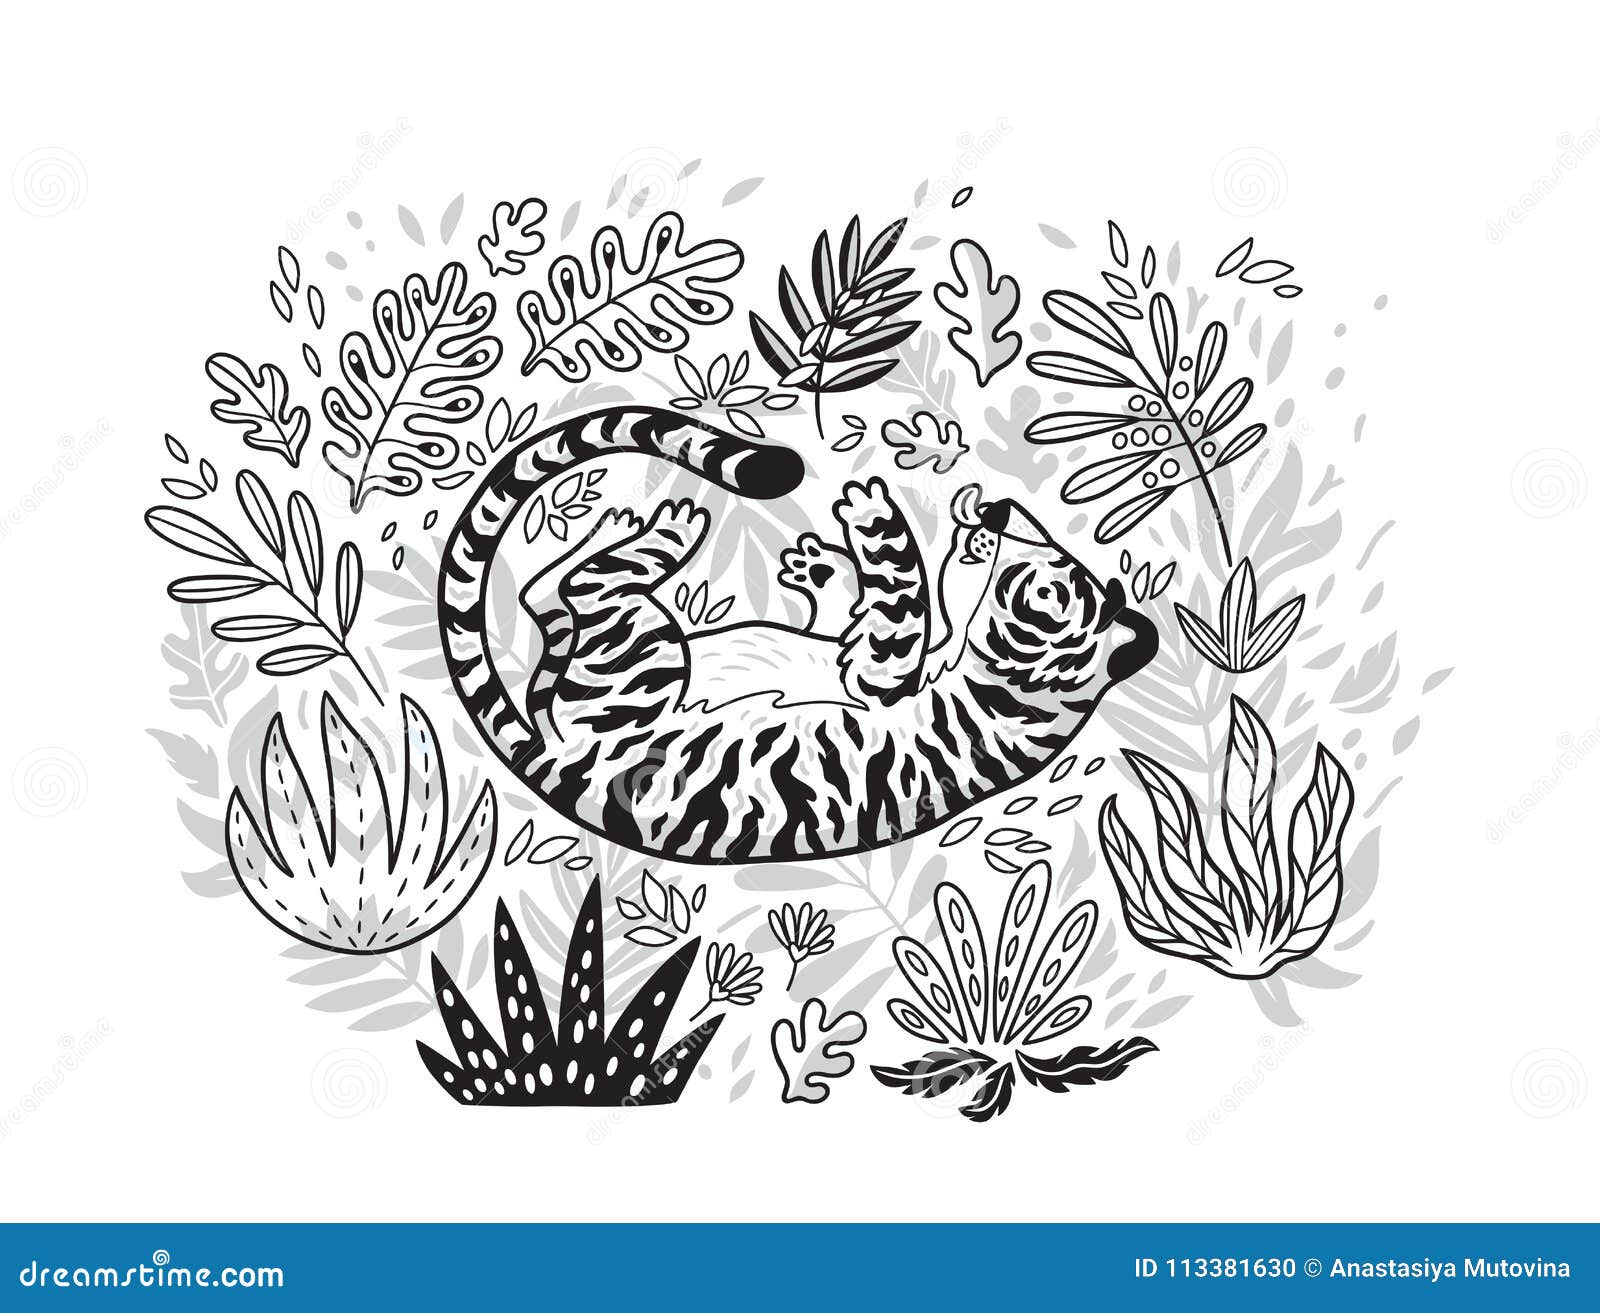 Contour Print. Tiger Playing with Leaf in Tropical Garden. Black